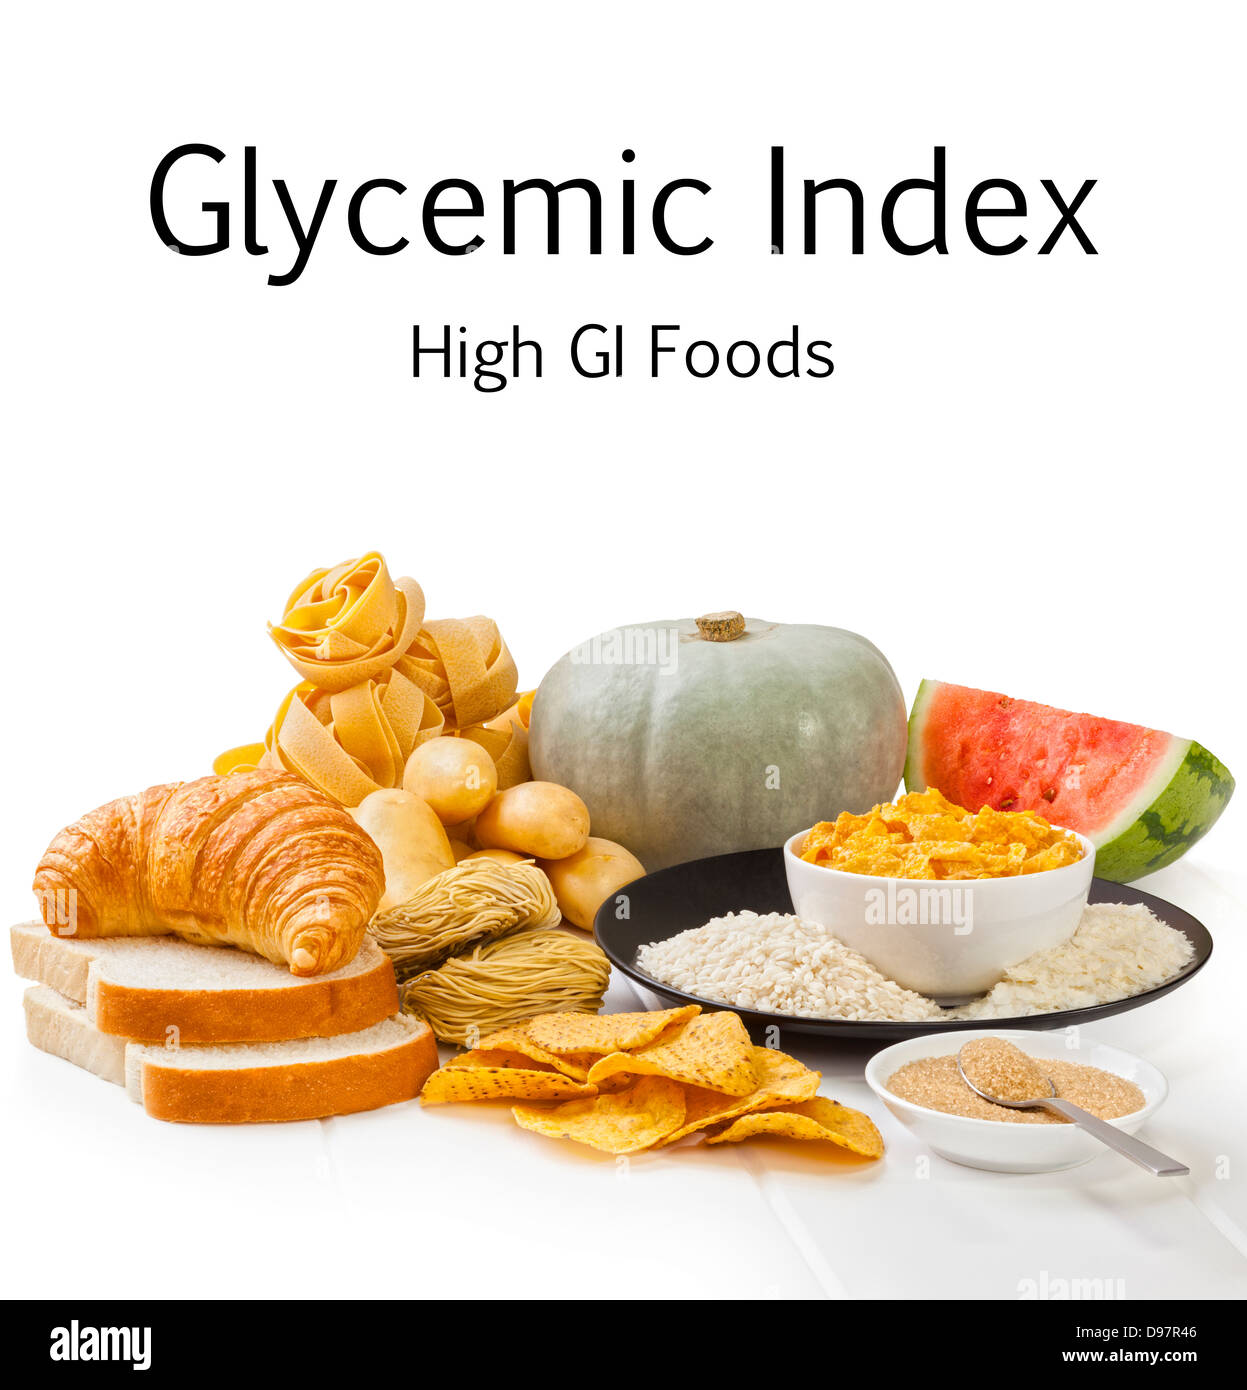 High Glycaemic Index Foods - Carbohydrates which have a high glycaemic index rating, on a white background. Front to back focus. Stock Photo